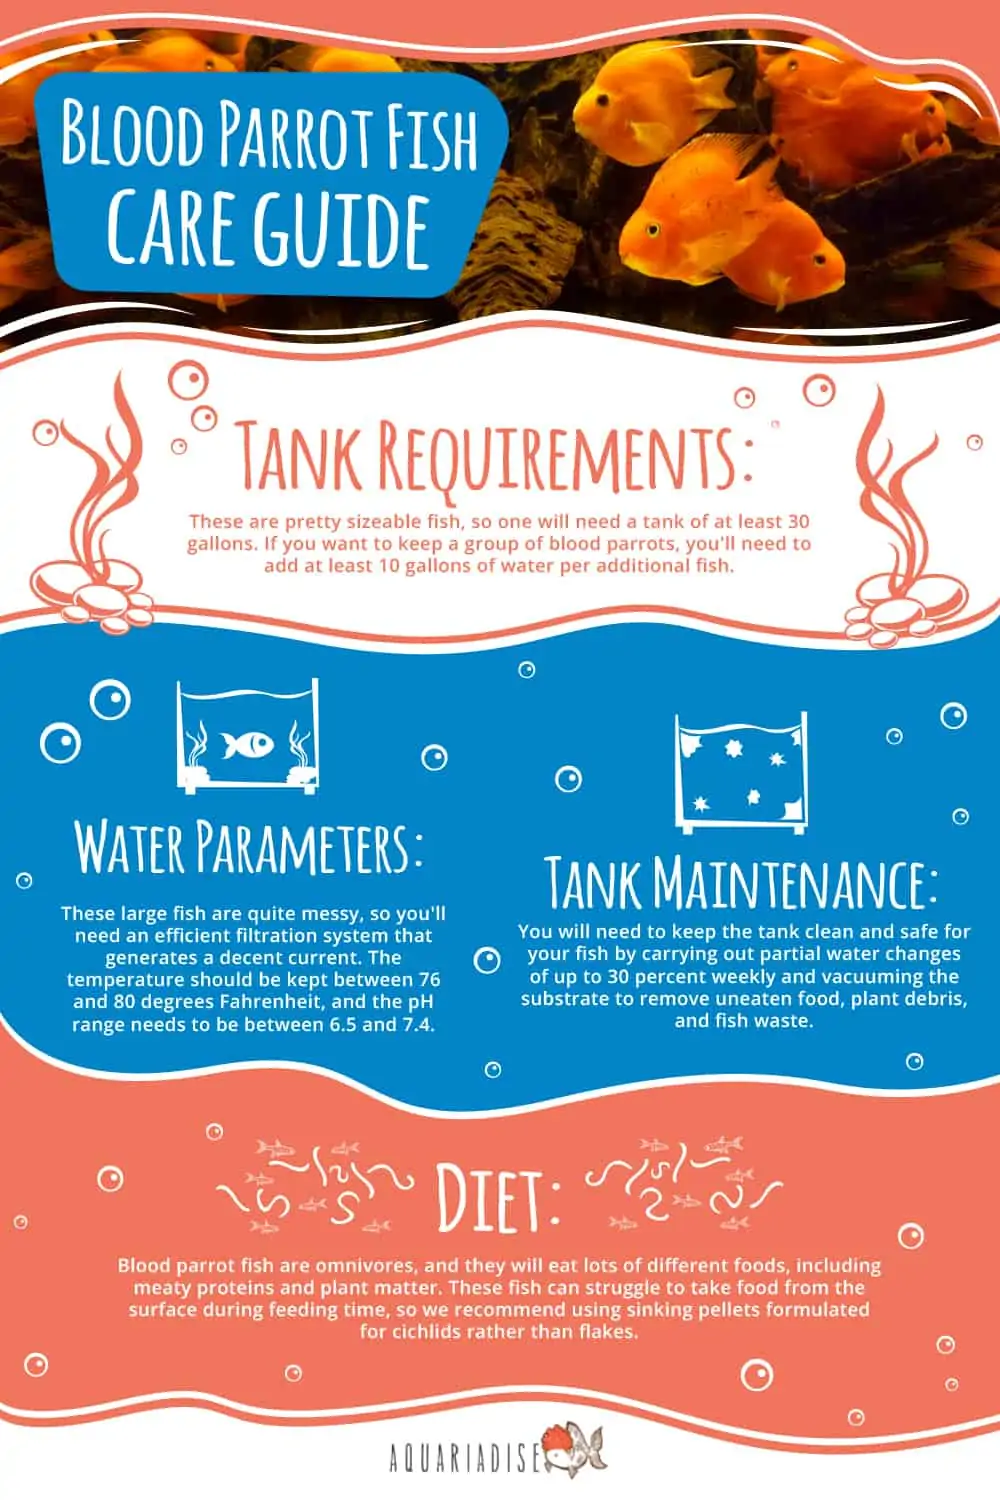 Blood Parrot Fish Care Guide Infographic 